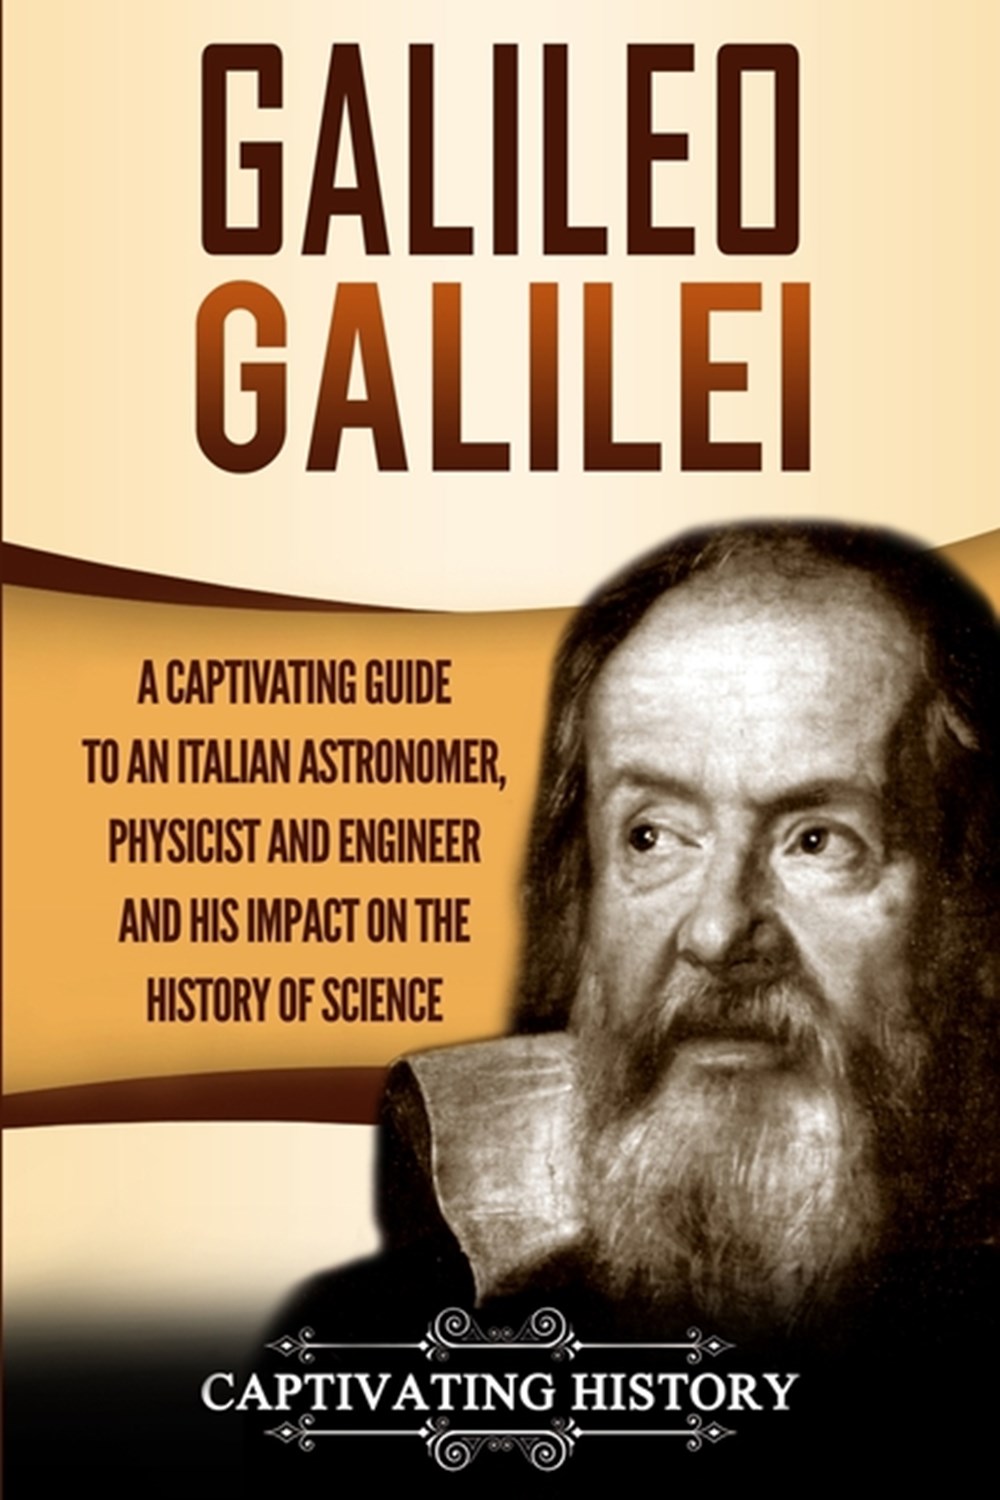 Galileo Galilei: A Captivating Guide to an Italian Astronomer, Physicist, and Engineer and His Impac